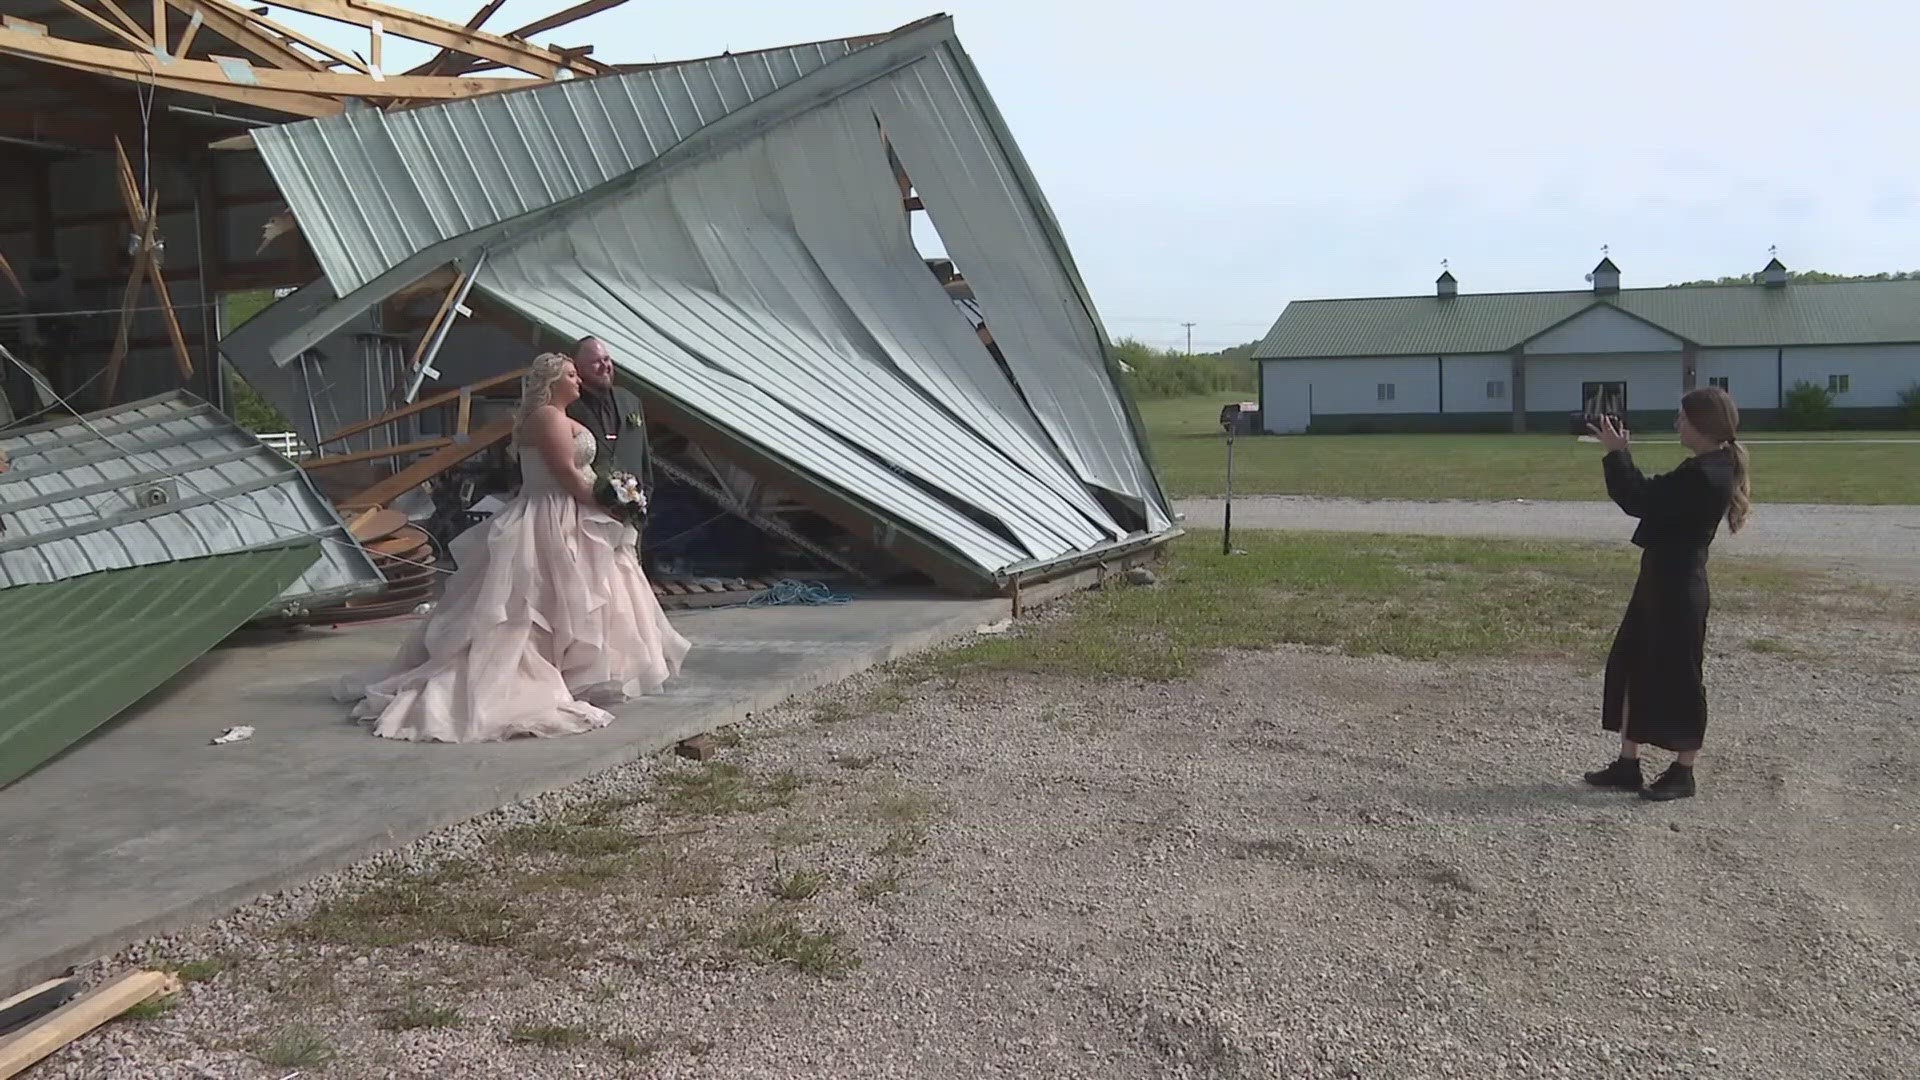 VIOLENT WEATHER, INCLUDING A TORNADO, RIPPED THROUGH EUREKA, MISSOURI THURSDAY. And it hit RIGHT IN THE MIDDLE OF the rehearsal dinner for TAYLOR AND Kyle.